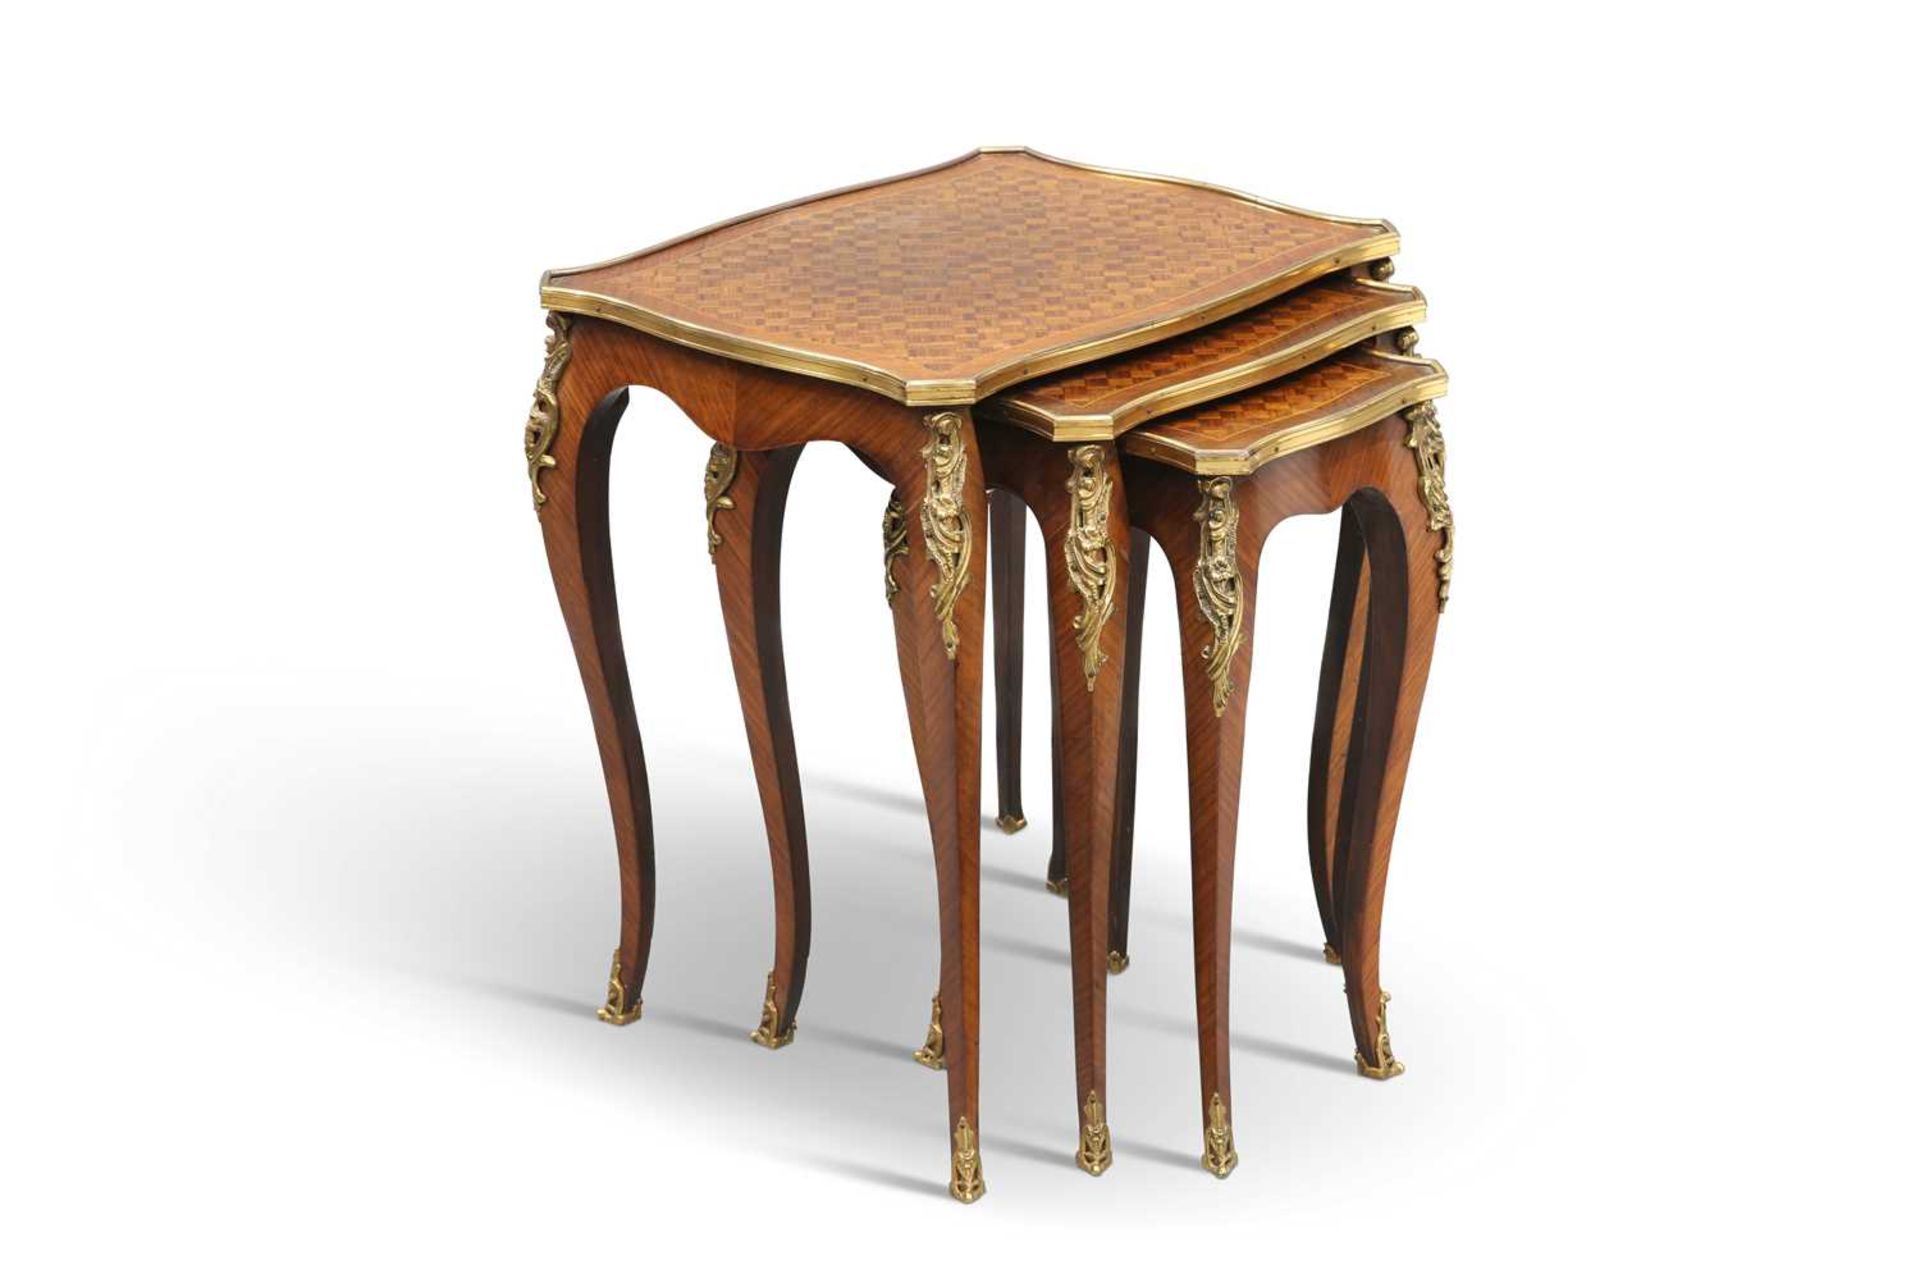 A SET OF THREE LOUIS XV STYLE GILT-METAL MOUNTED PARQUETRY NESTING TABLES, MID-20TH CENTURY